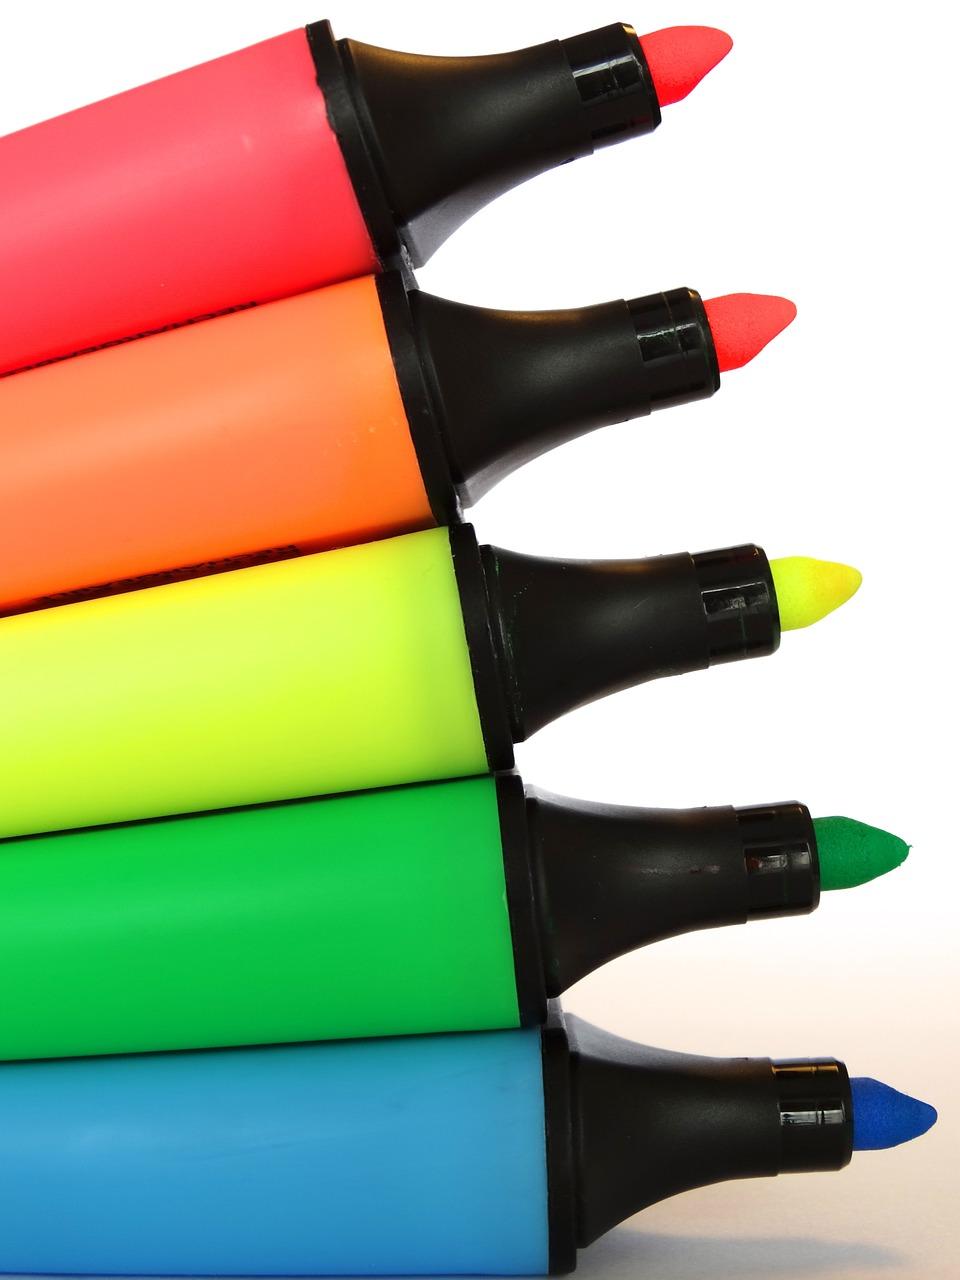 Which highlighter Colour is best for memory? 